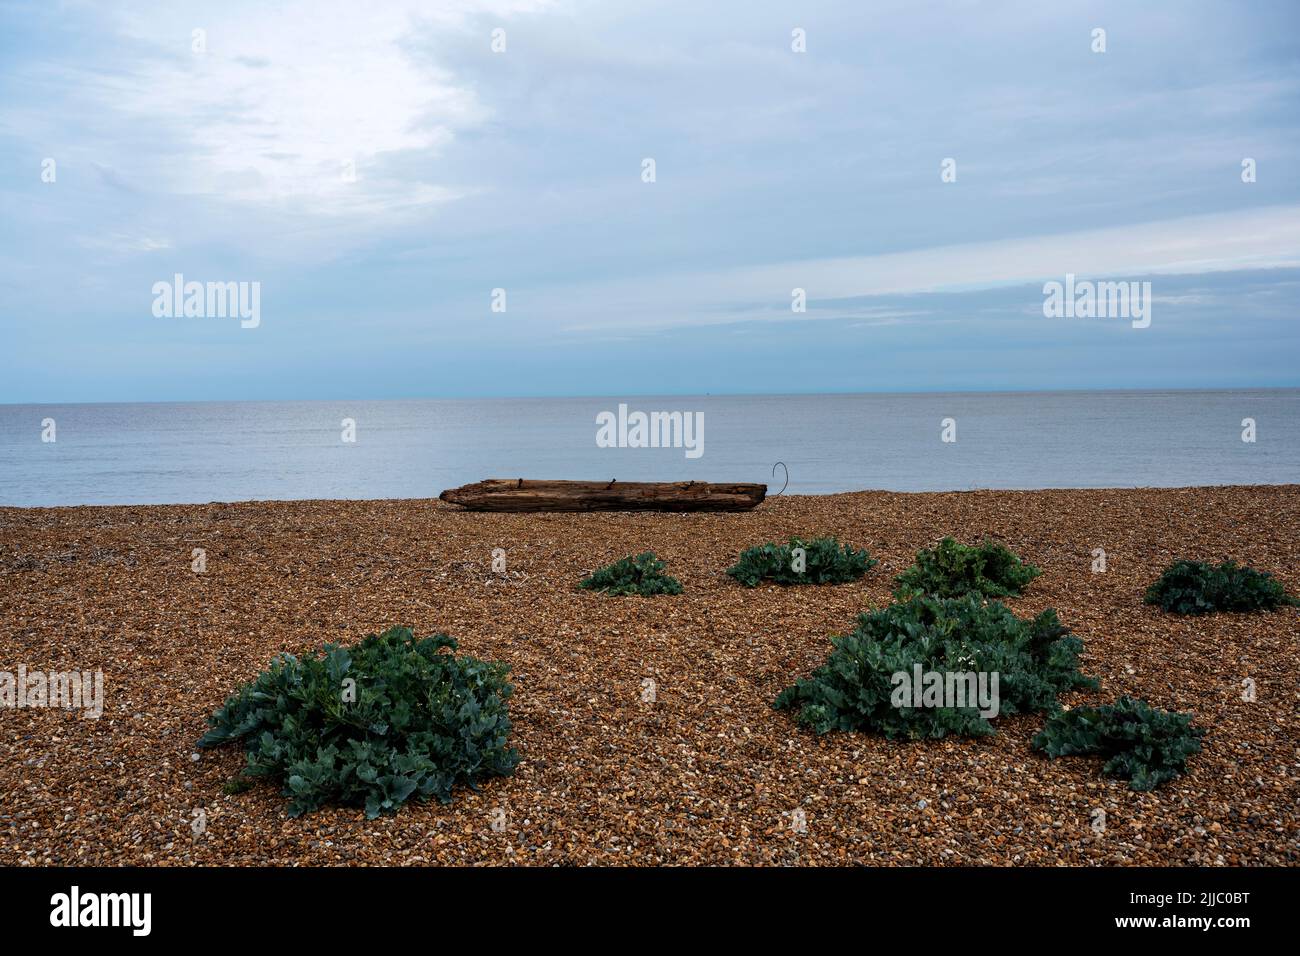 !40-year old wooden groyne or breakwater washed up on the beach due to coastal erosion, Bawdsey Ferry, Suffolk, UK. Stock Photo